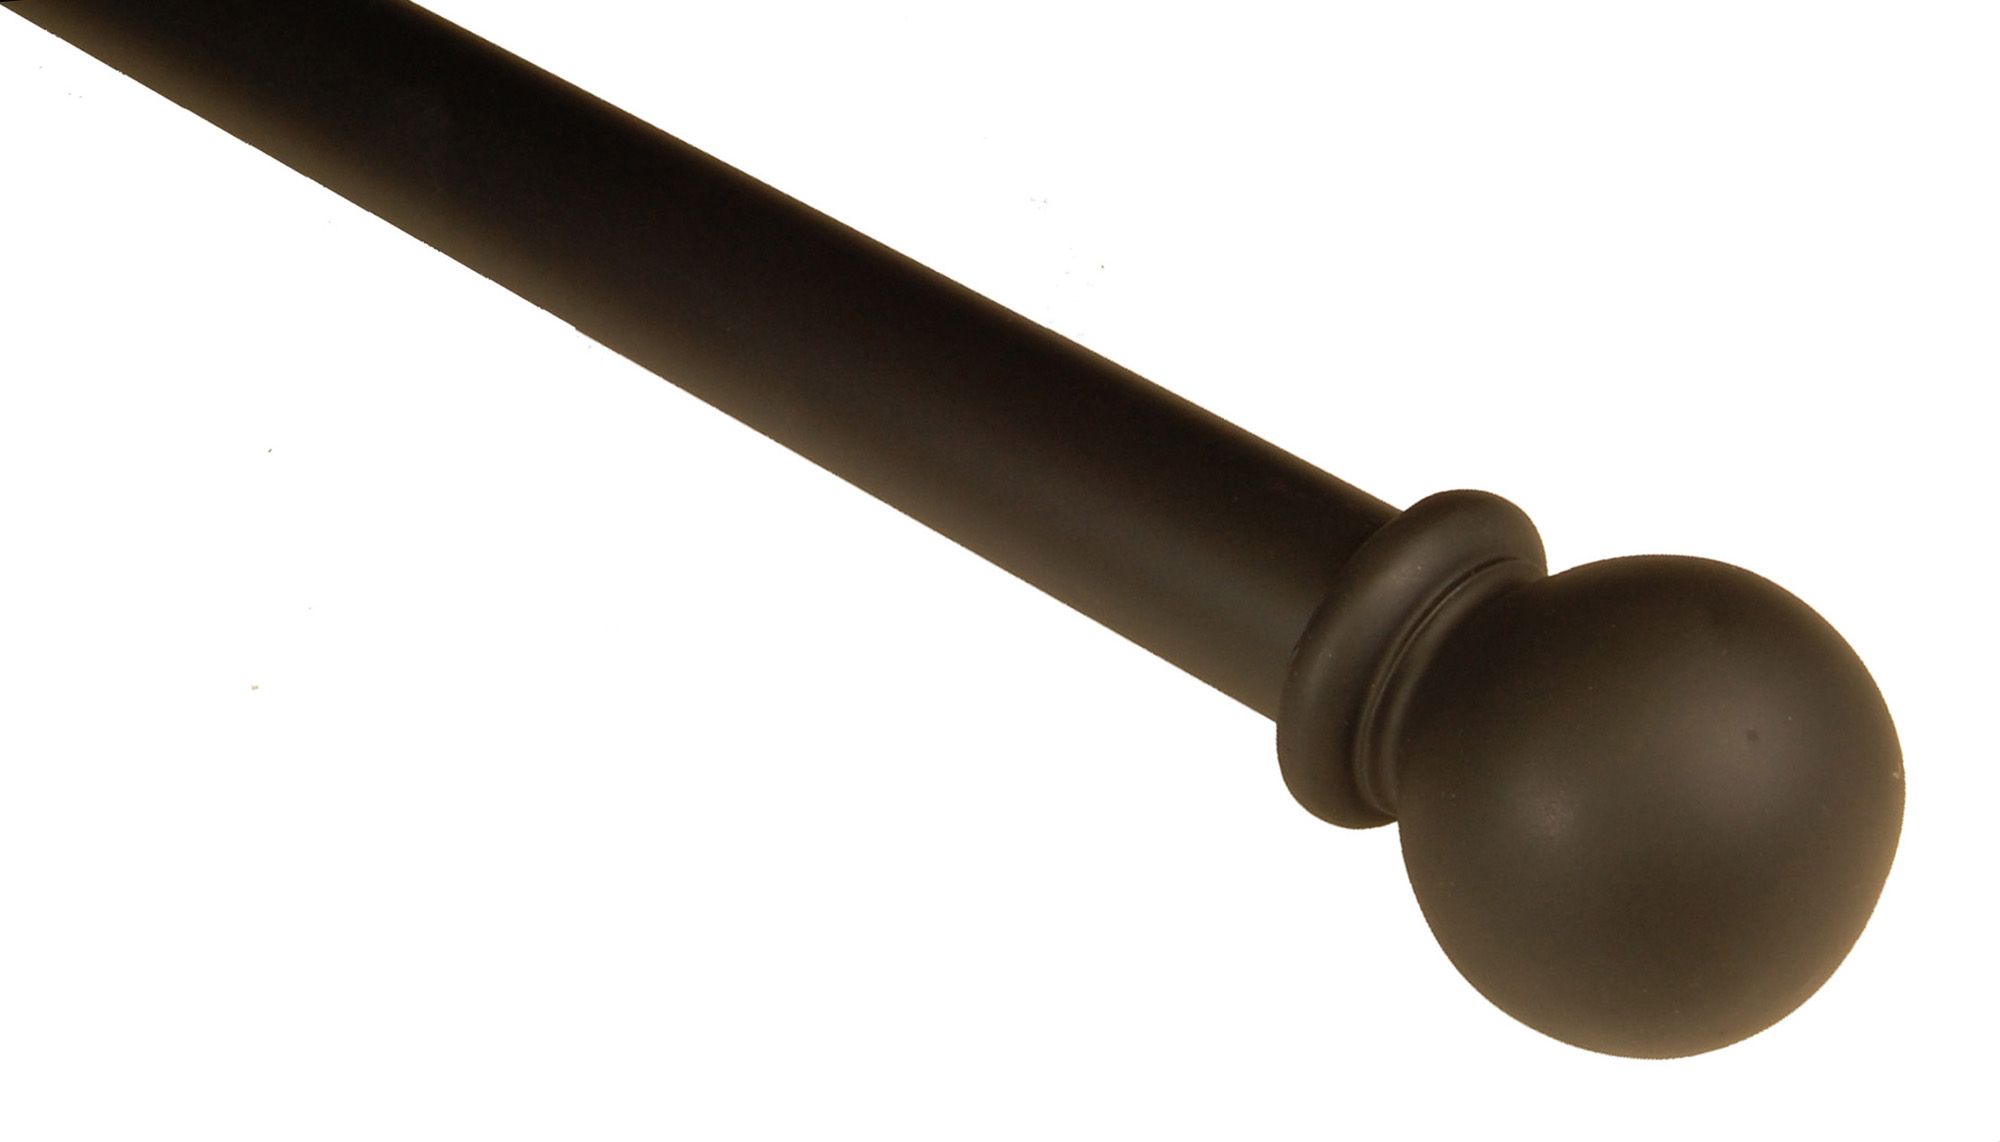 BCL Classic Ball Curtain Rod, Black Finish, 48-inch to 86-inch, 1.25-inch Diameter Pole